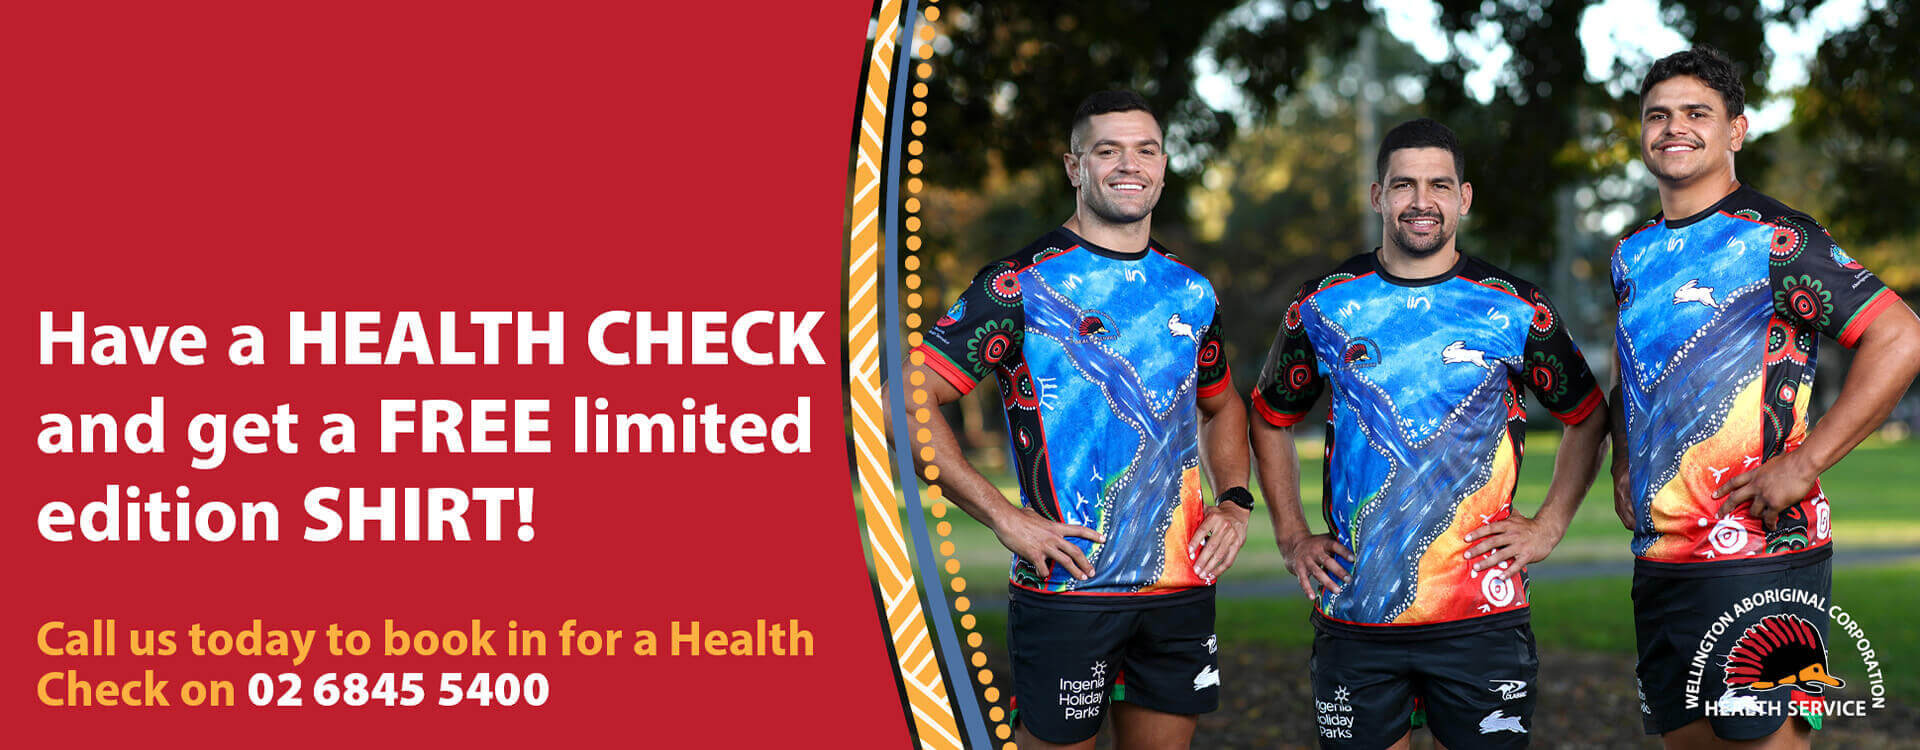 Health Check Limited Shirt Offer